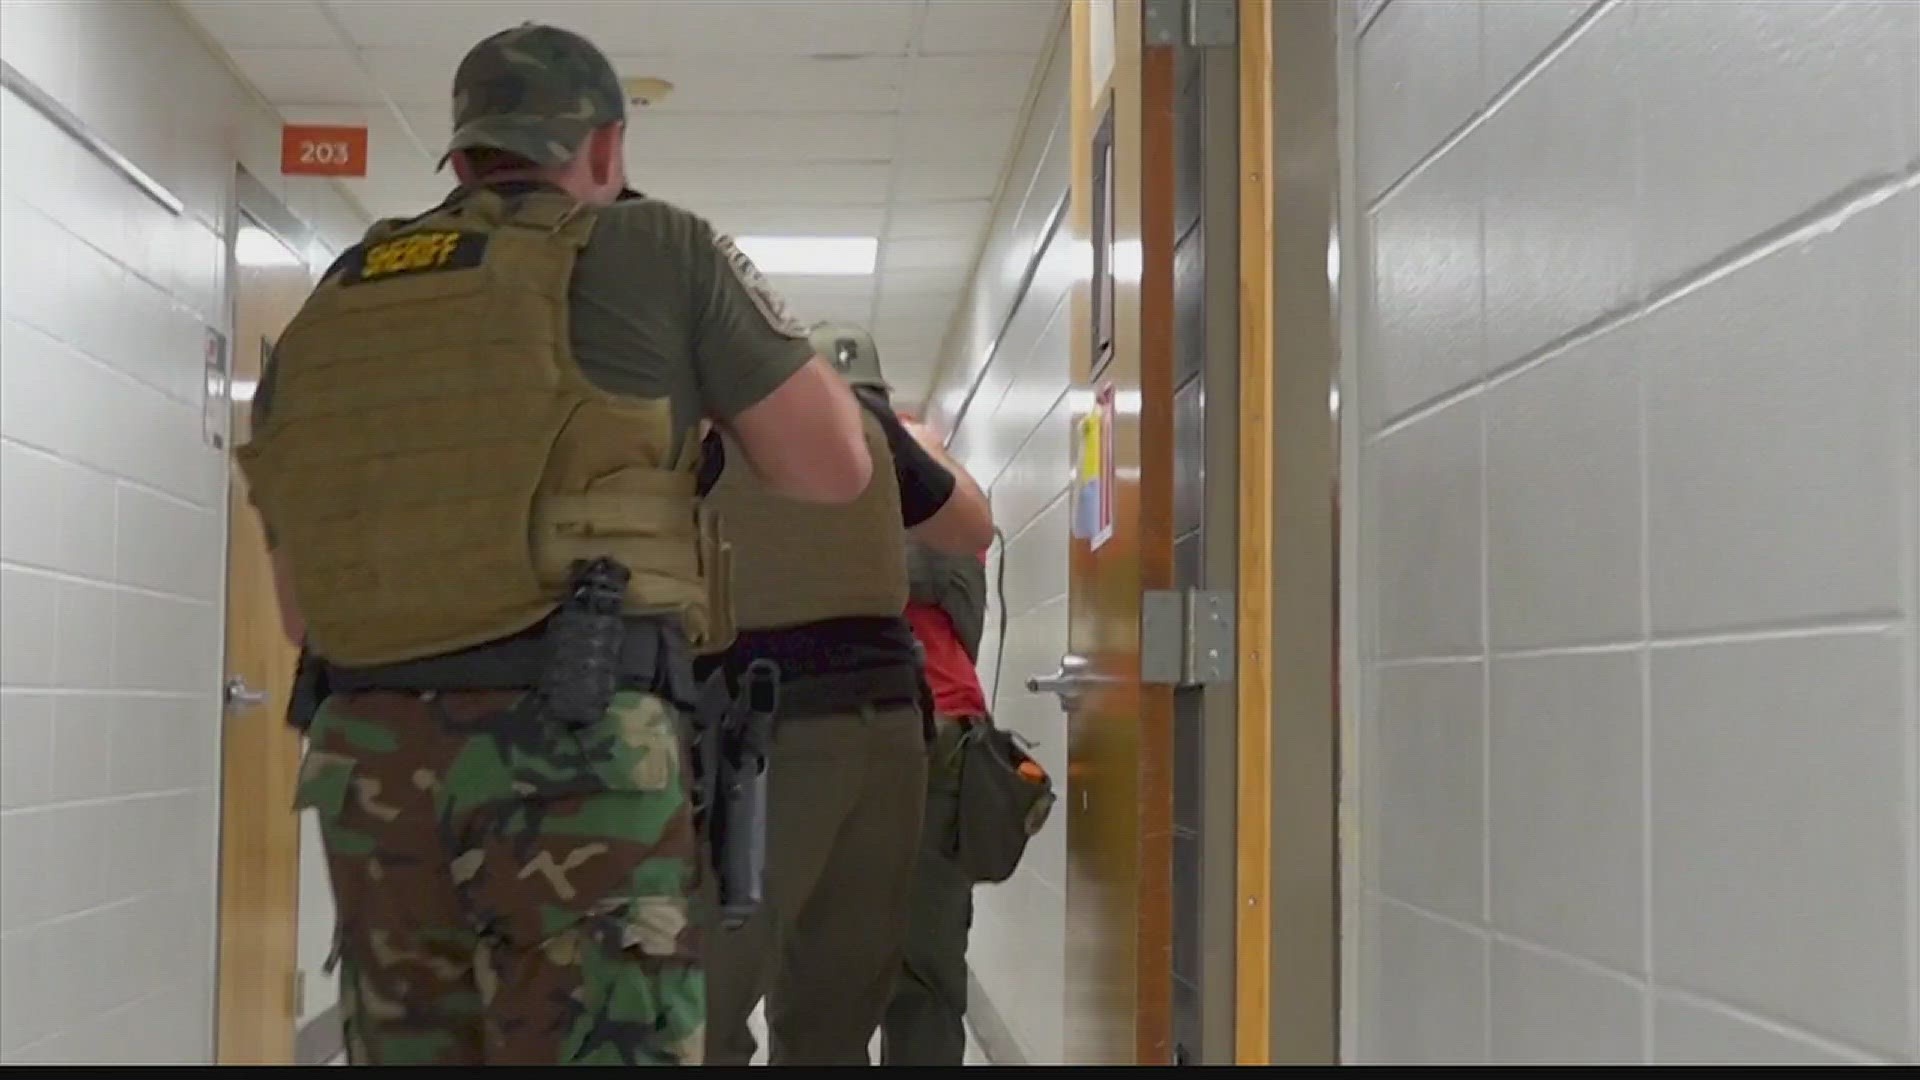 As part of back-to-school prep, deputies conduct tactical first aid training and active shooter response.